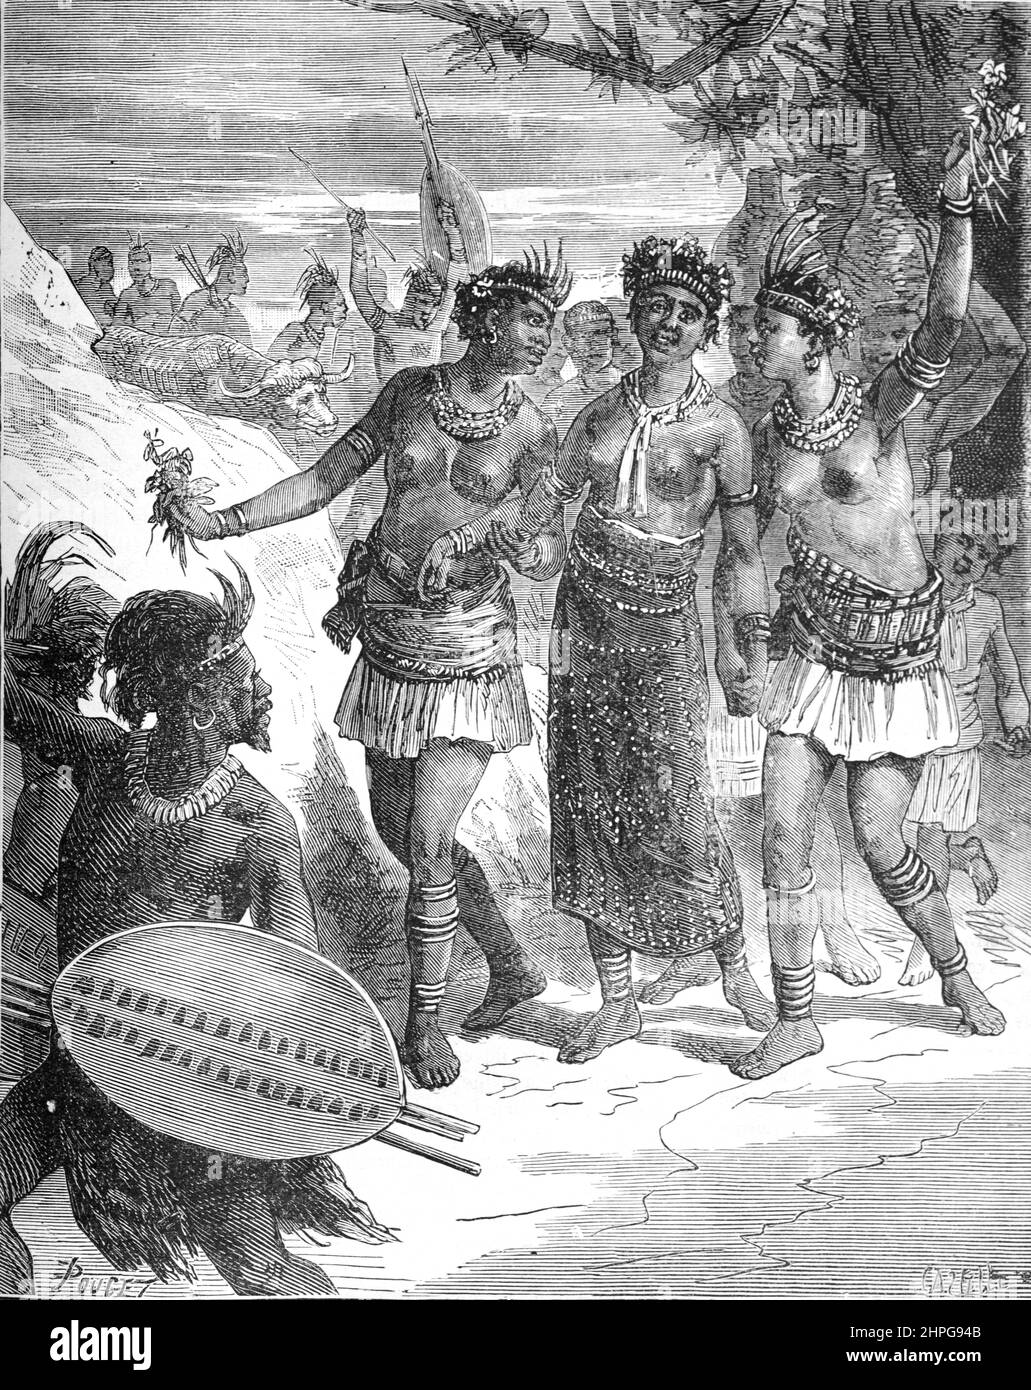 Marriage Ceremony or Wedding Among the Zulus or Zulu People of Southern or South Africa. Vintage Illustration or Engraving 1879 (Castelli) Stock Photo